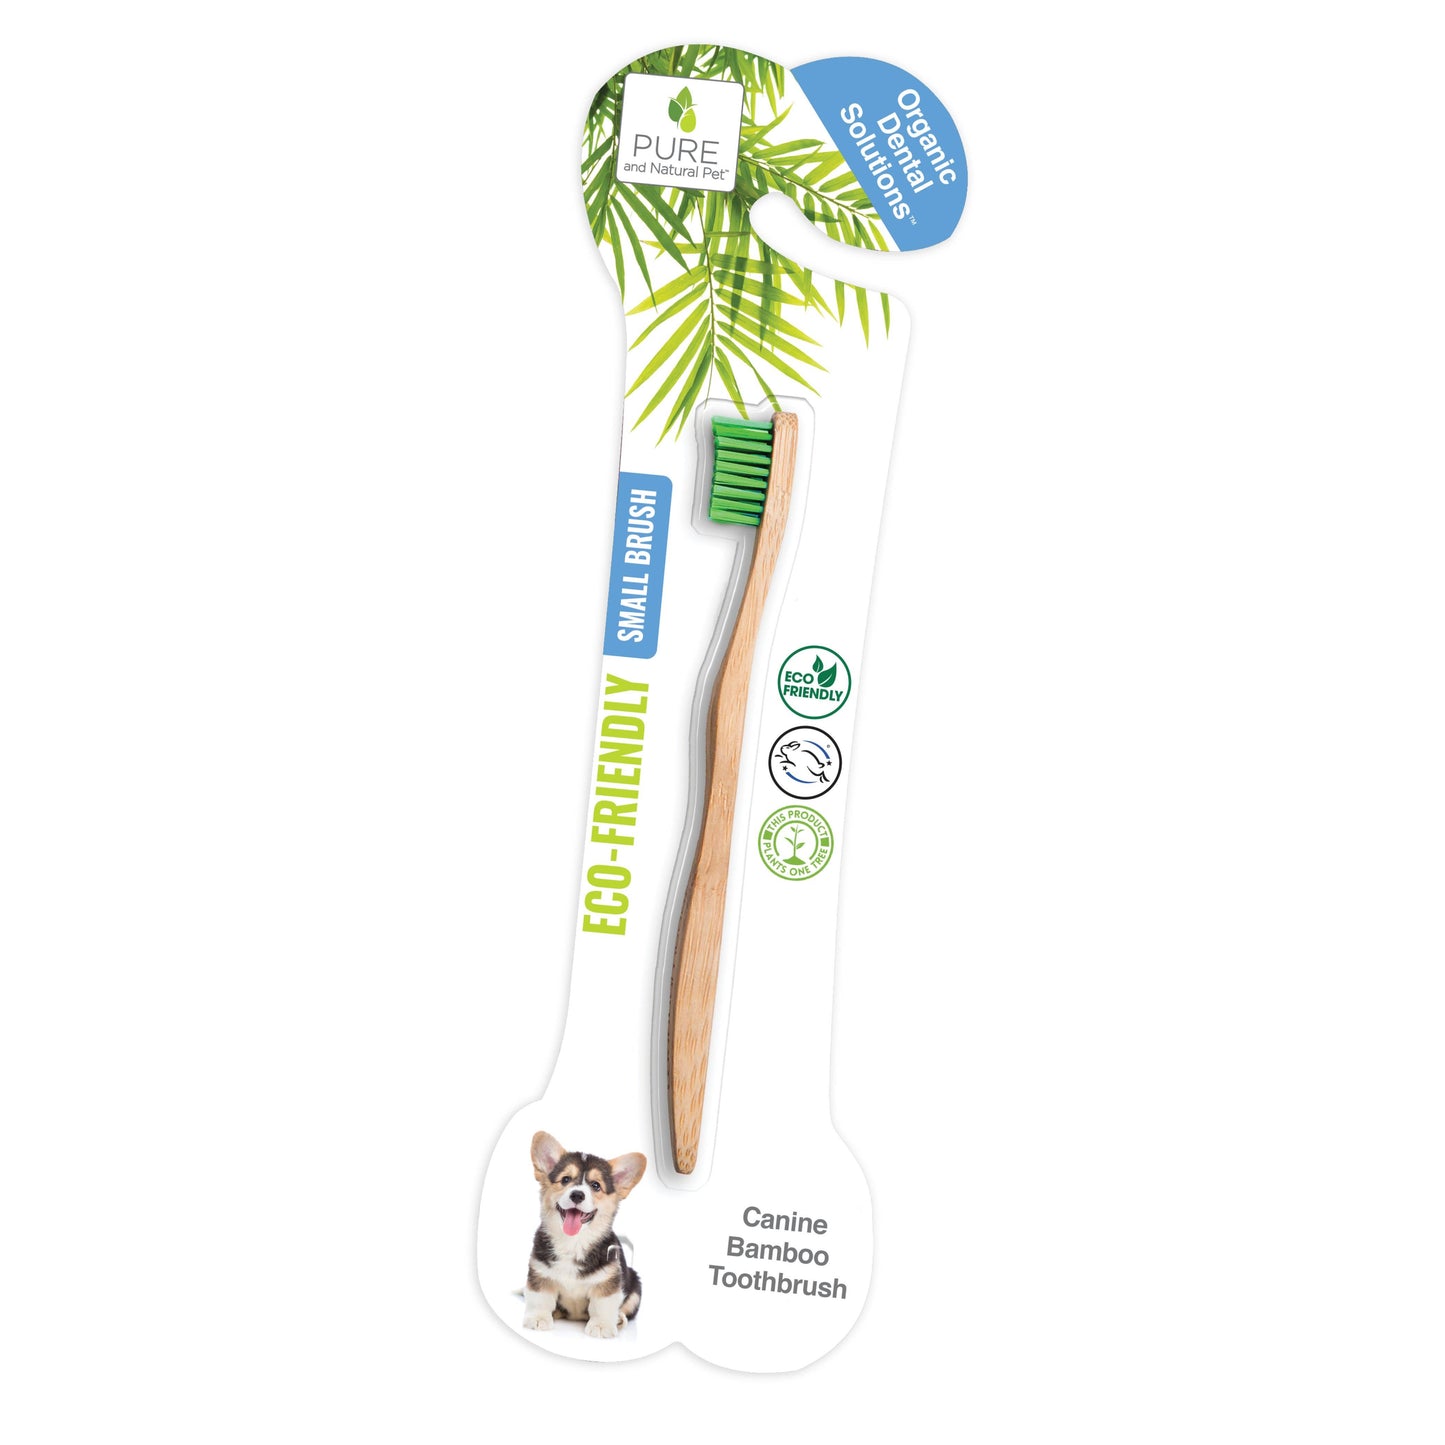 Pure and Natural Pet - Organic Dental Bamboo Toothbrush for Dogs - Small  Image